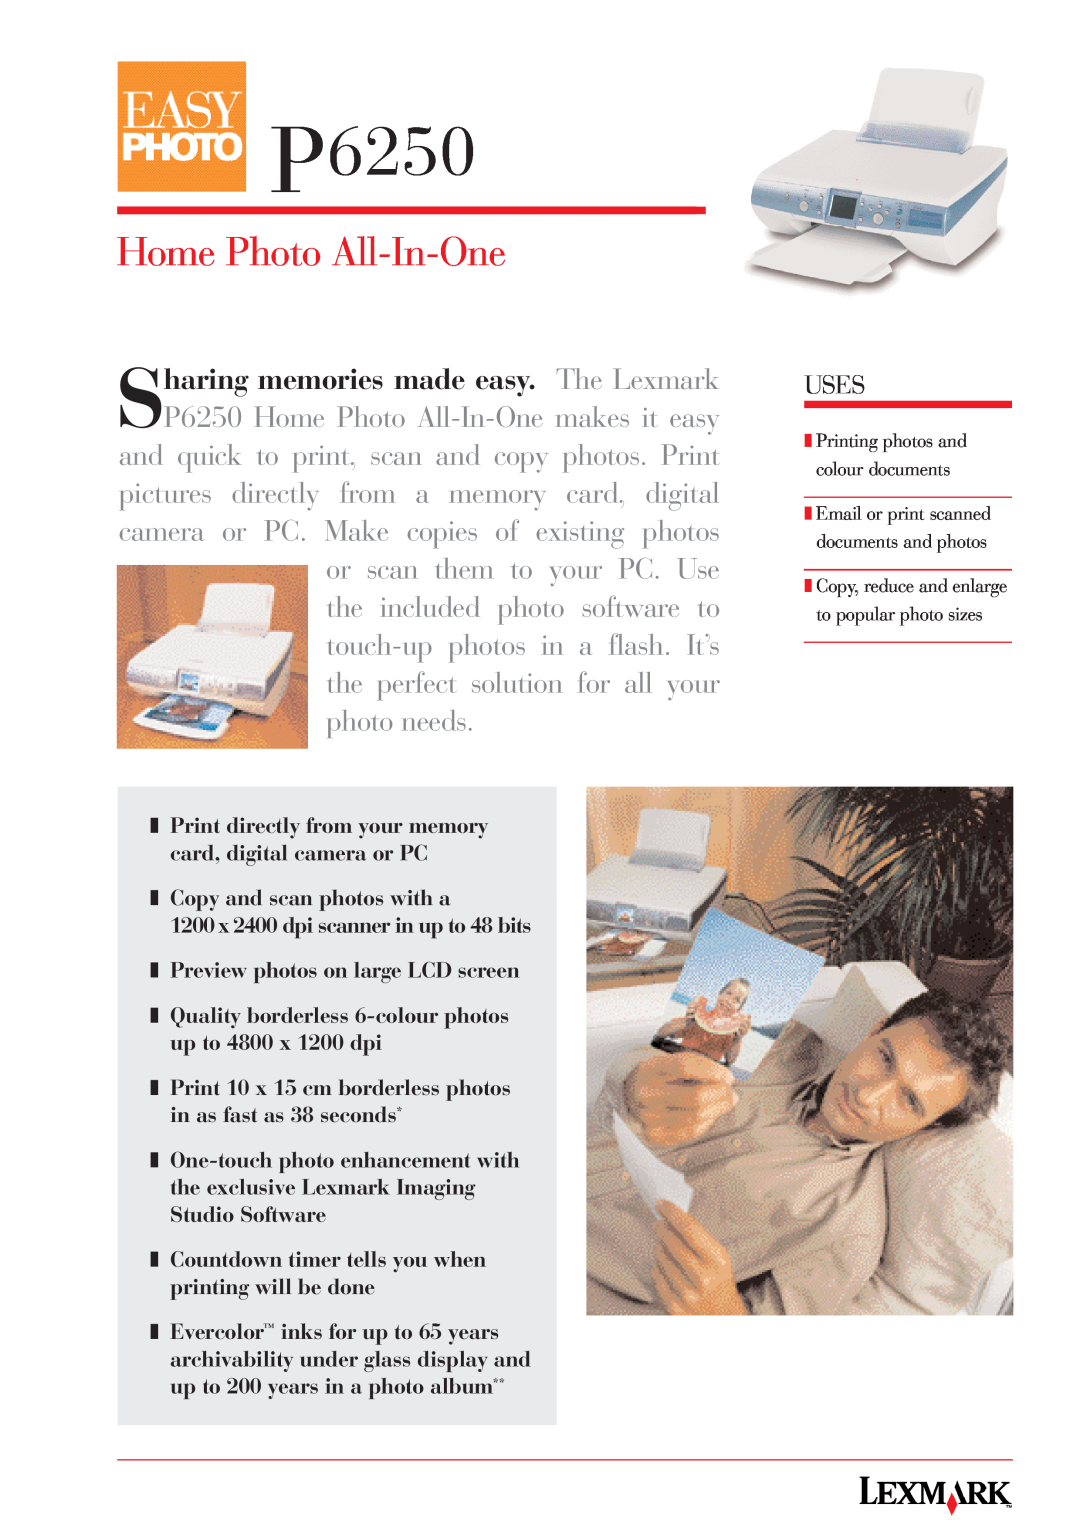 Lexmark manual P6250, Home Photo All-In-One 